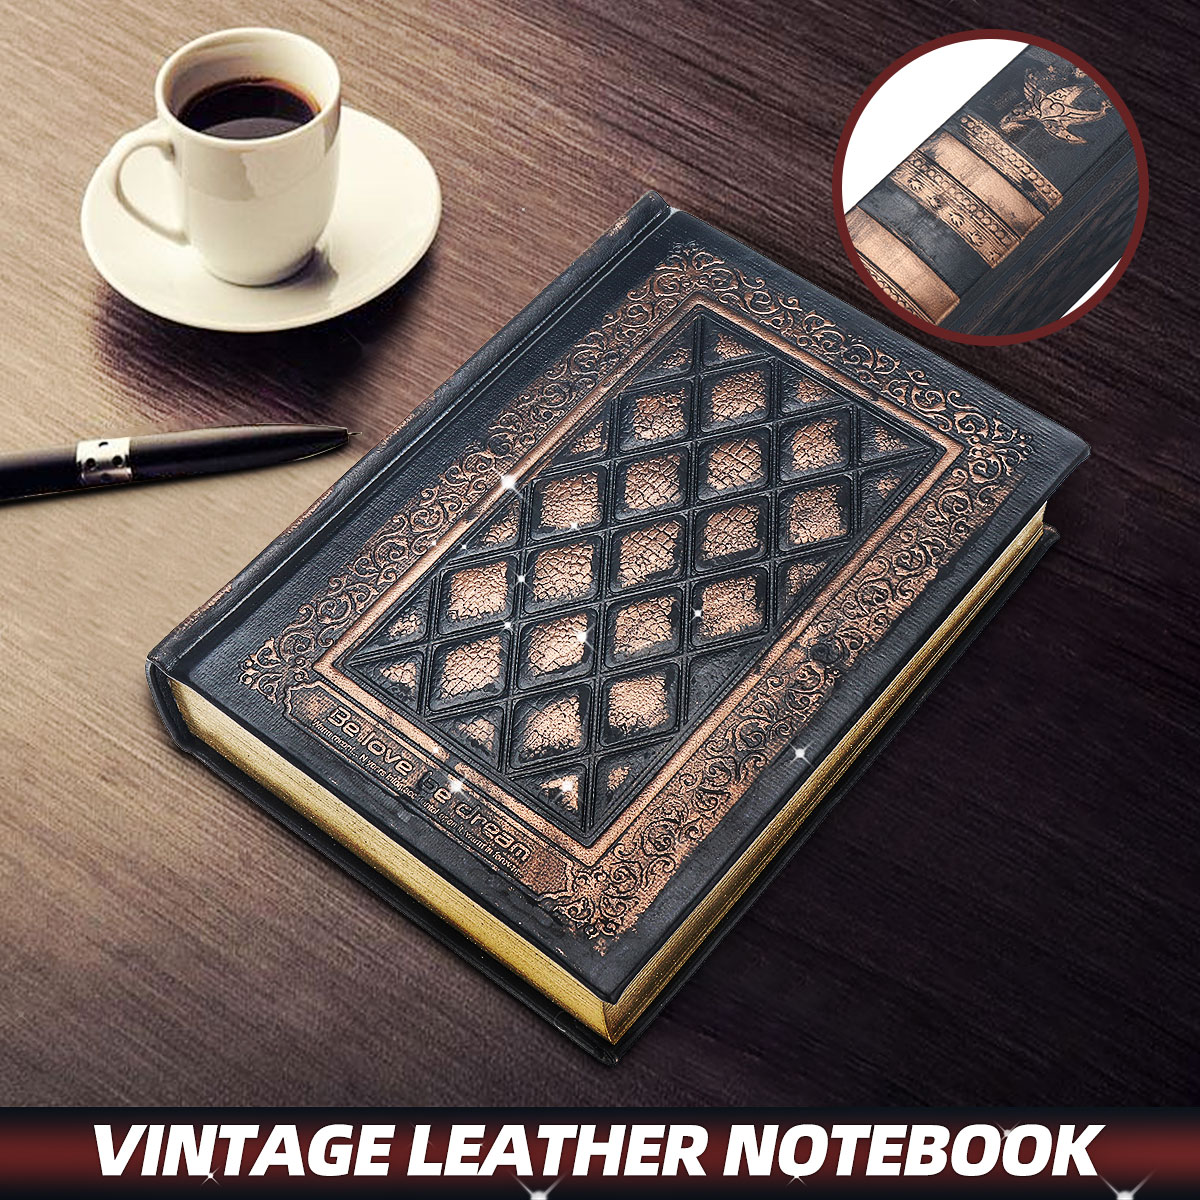 Vintage-Classic-Black-Golden-Plaid-Notebook-Diary-Creative-School-Office-Supplies-Stationery-Persona-921505-1